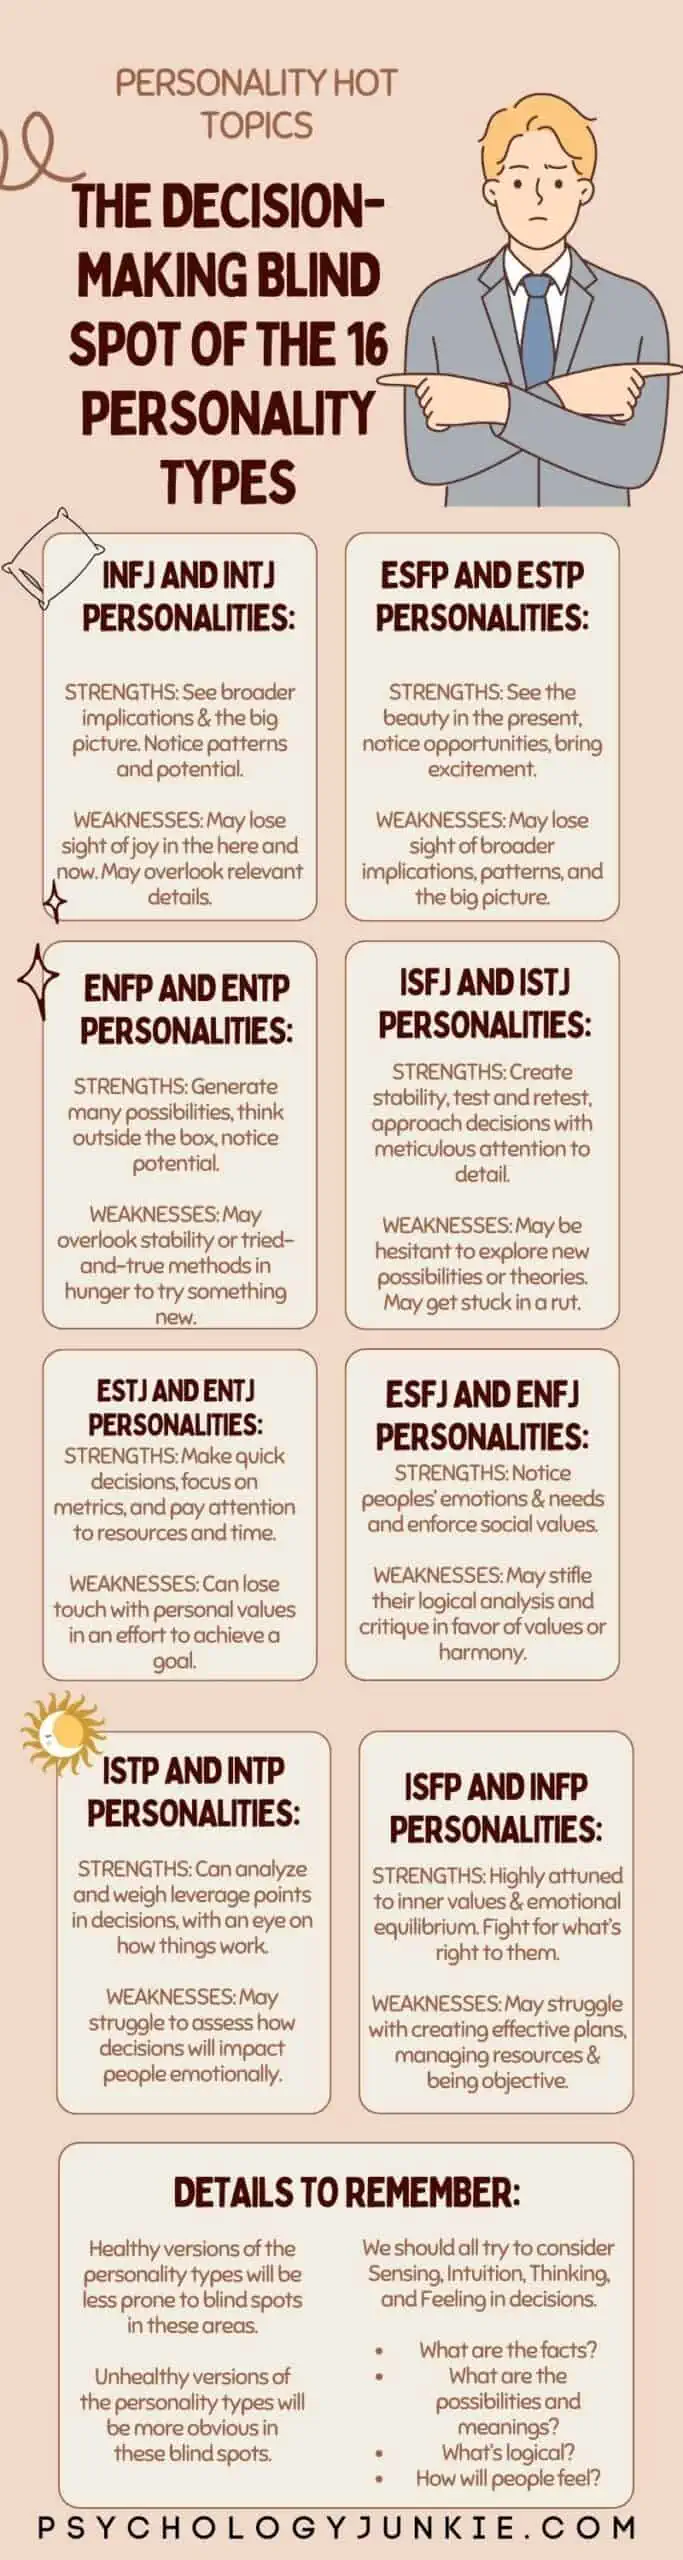 Blindseer (Oath) MBTI Personality Type: INFJ or INFP?